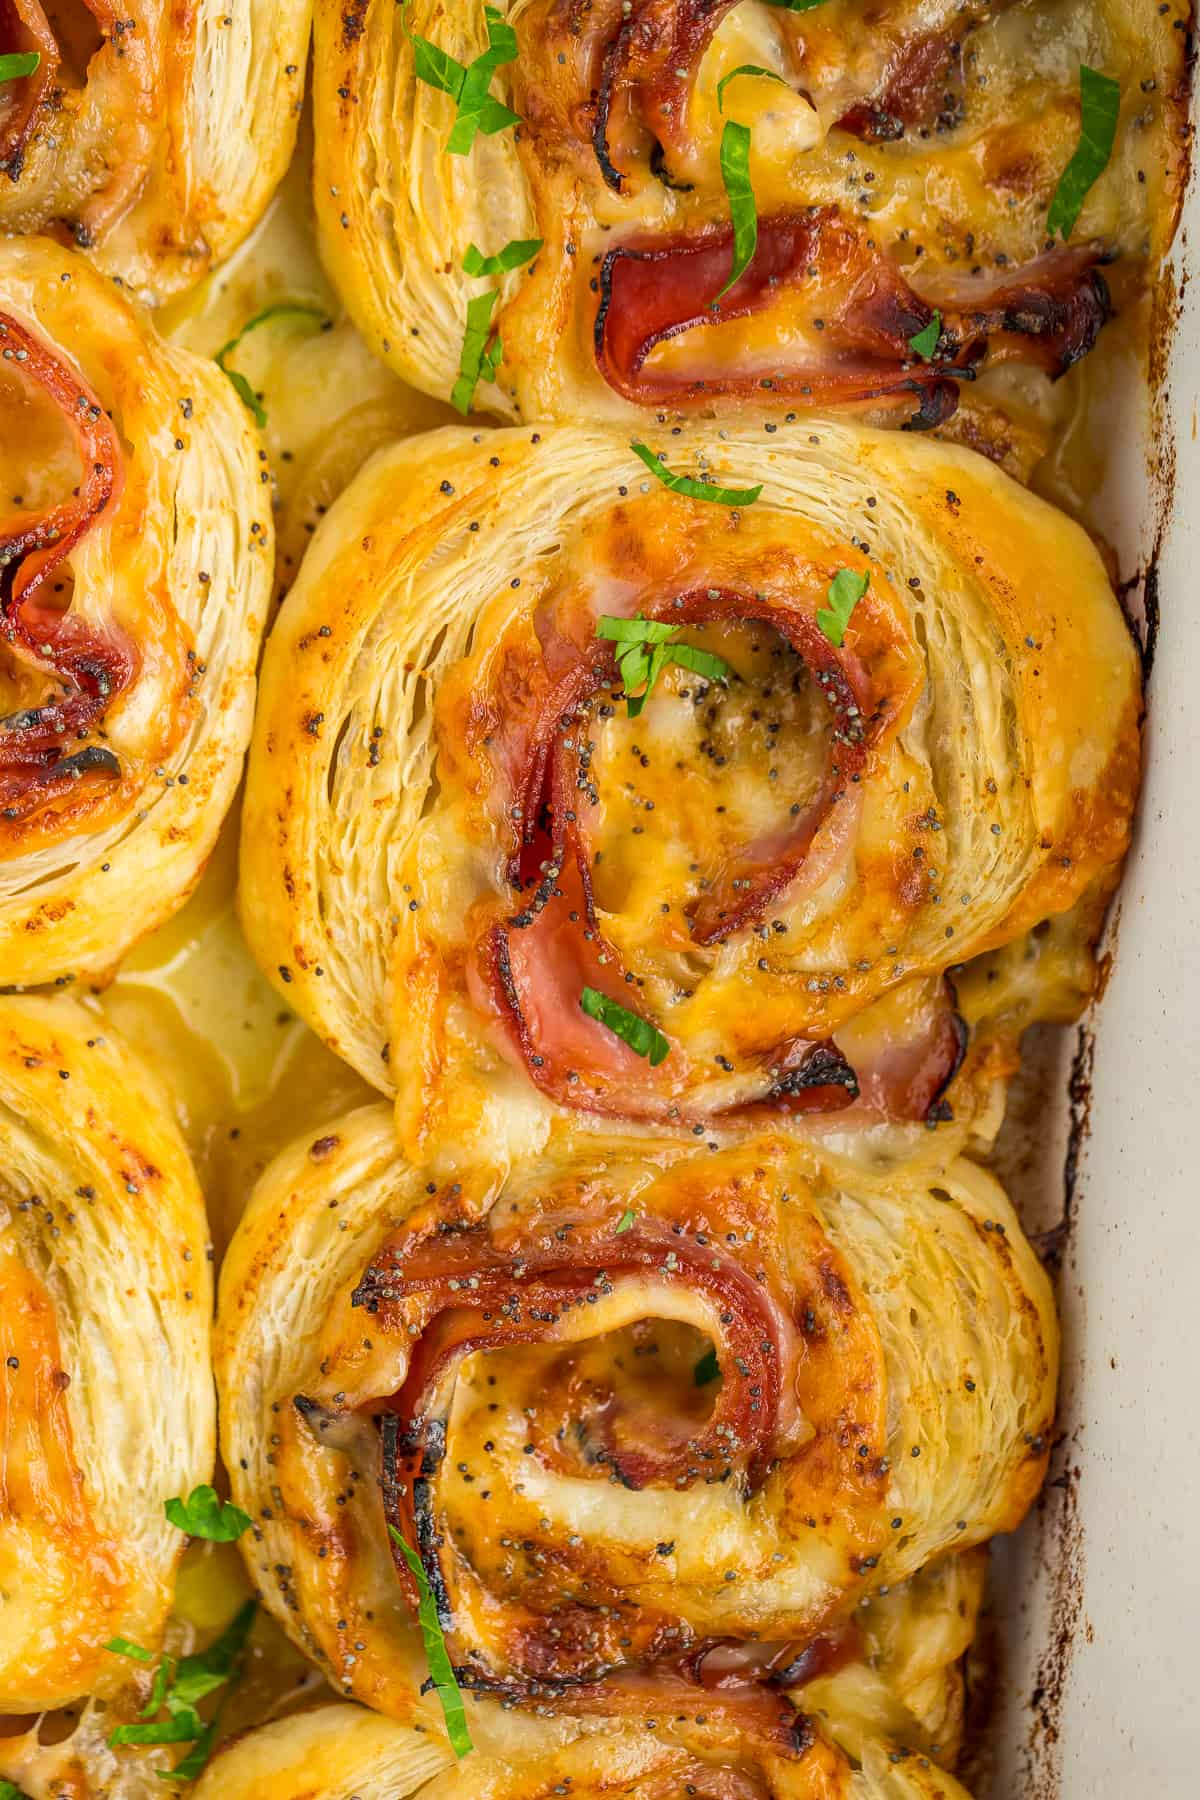 6 ham and cheese pinwheels in a white baking dish.